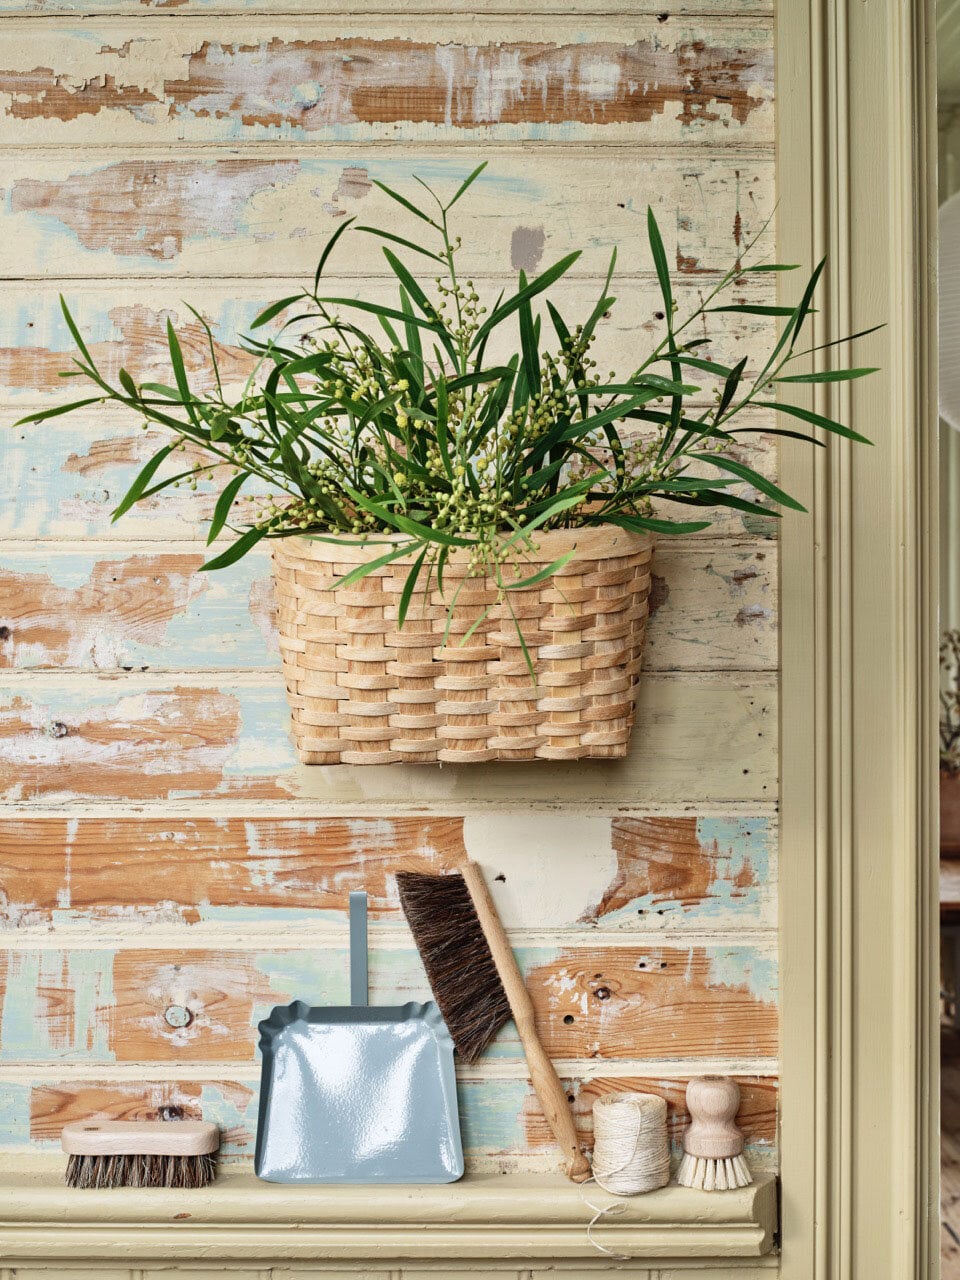 Wood Wall Basket Evy Nature S/2